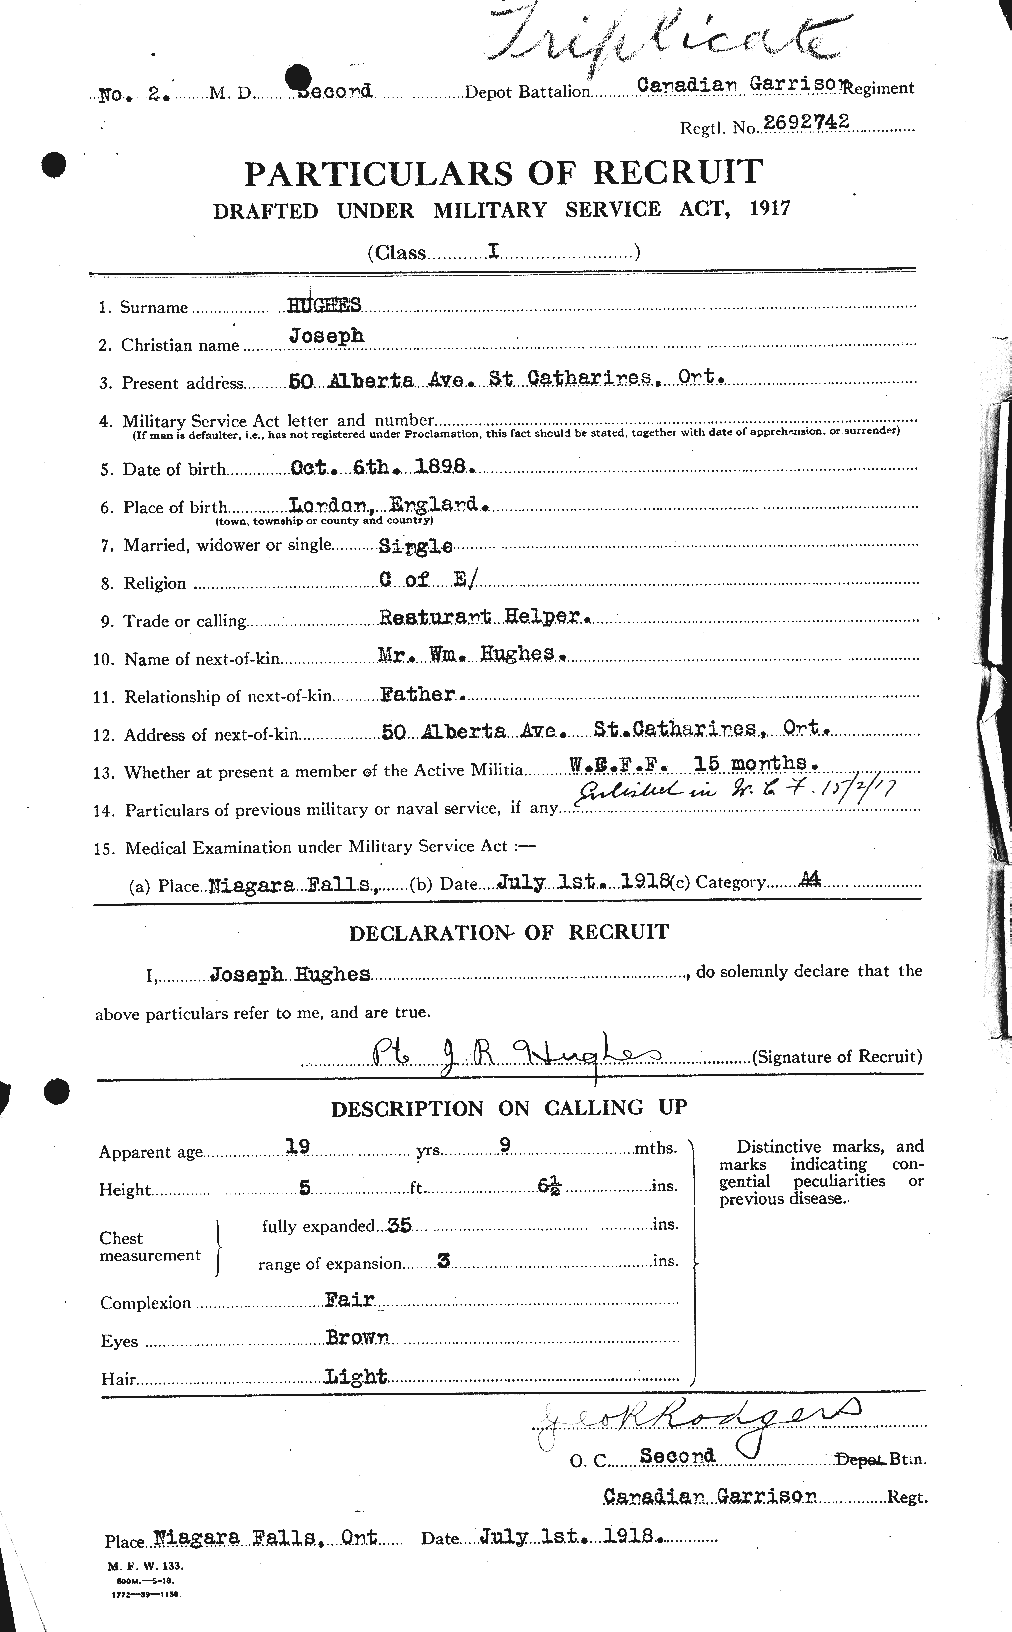 Personnel Records of the First World War - CEF 404064a